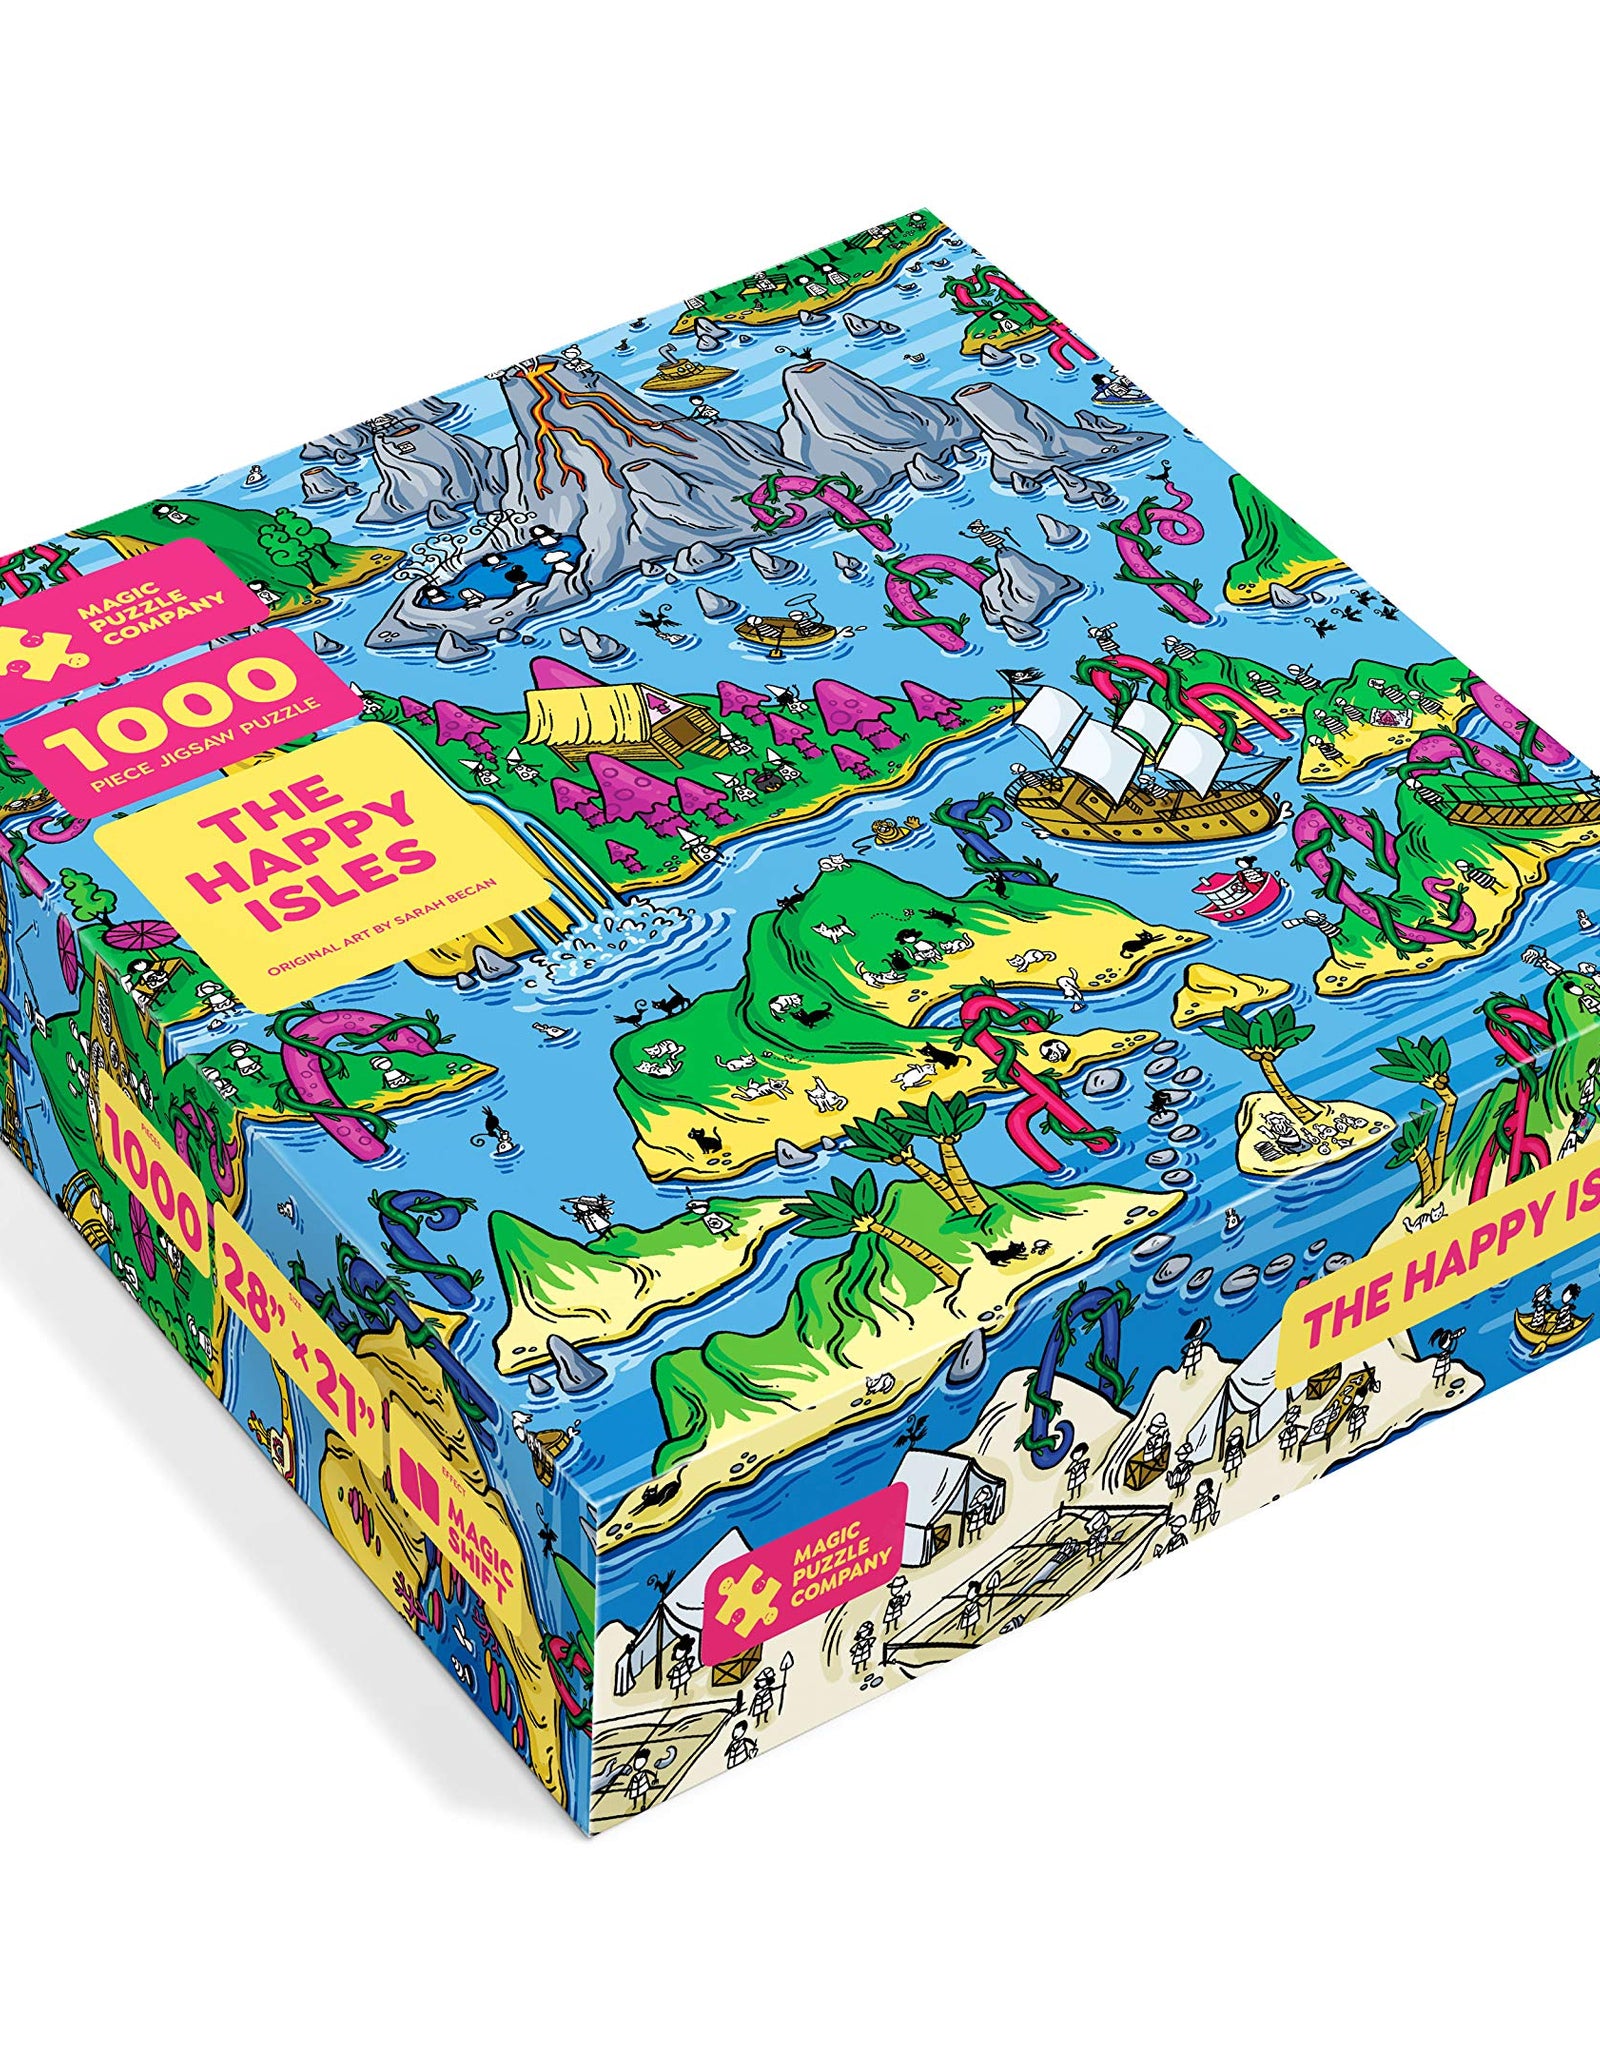 The Mystic Maze - 1000-Piece Jigsaw Puzzle from The Magic Puzzle Company